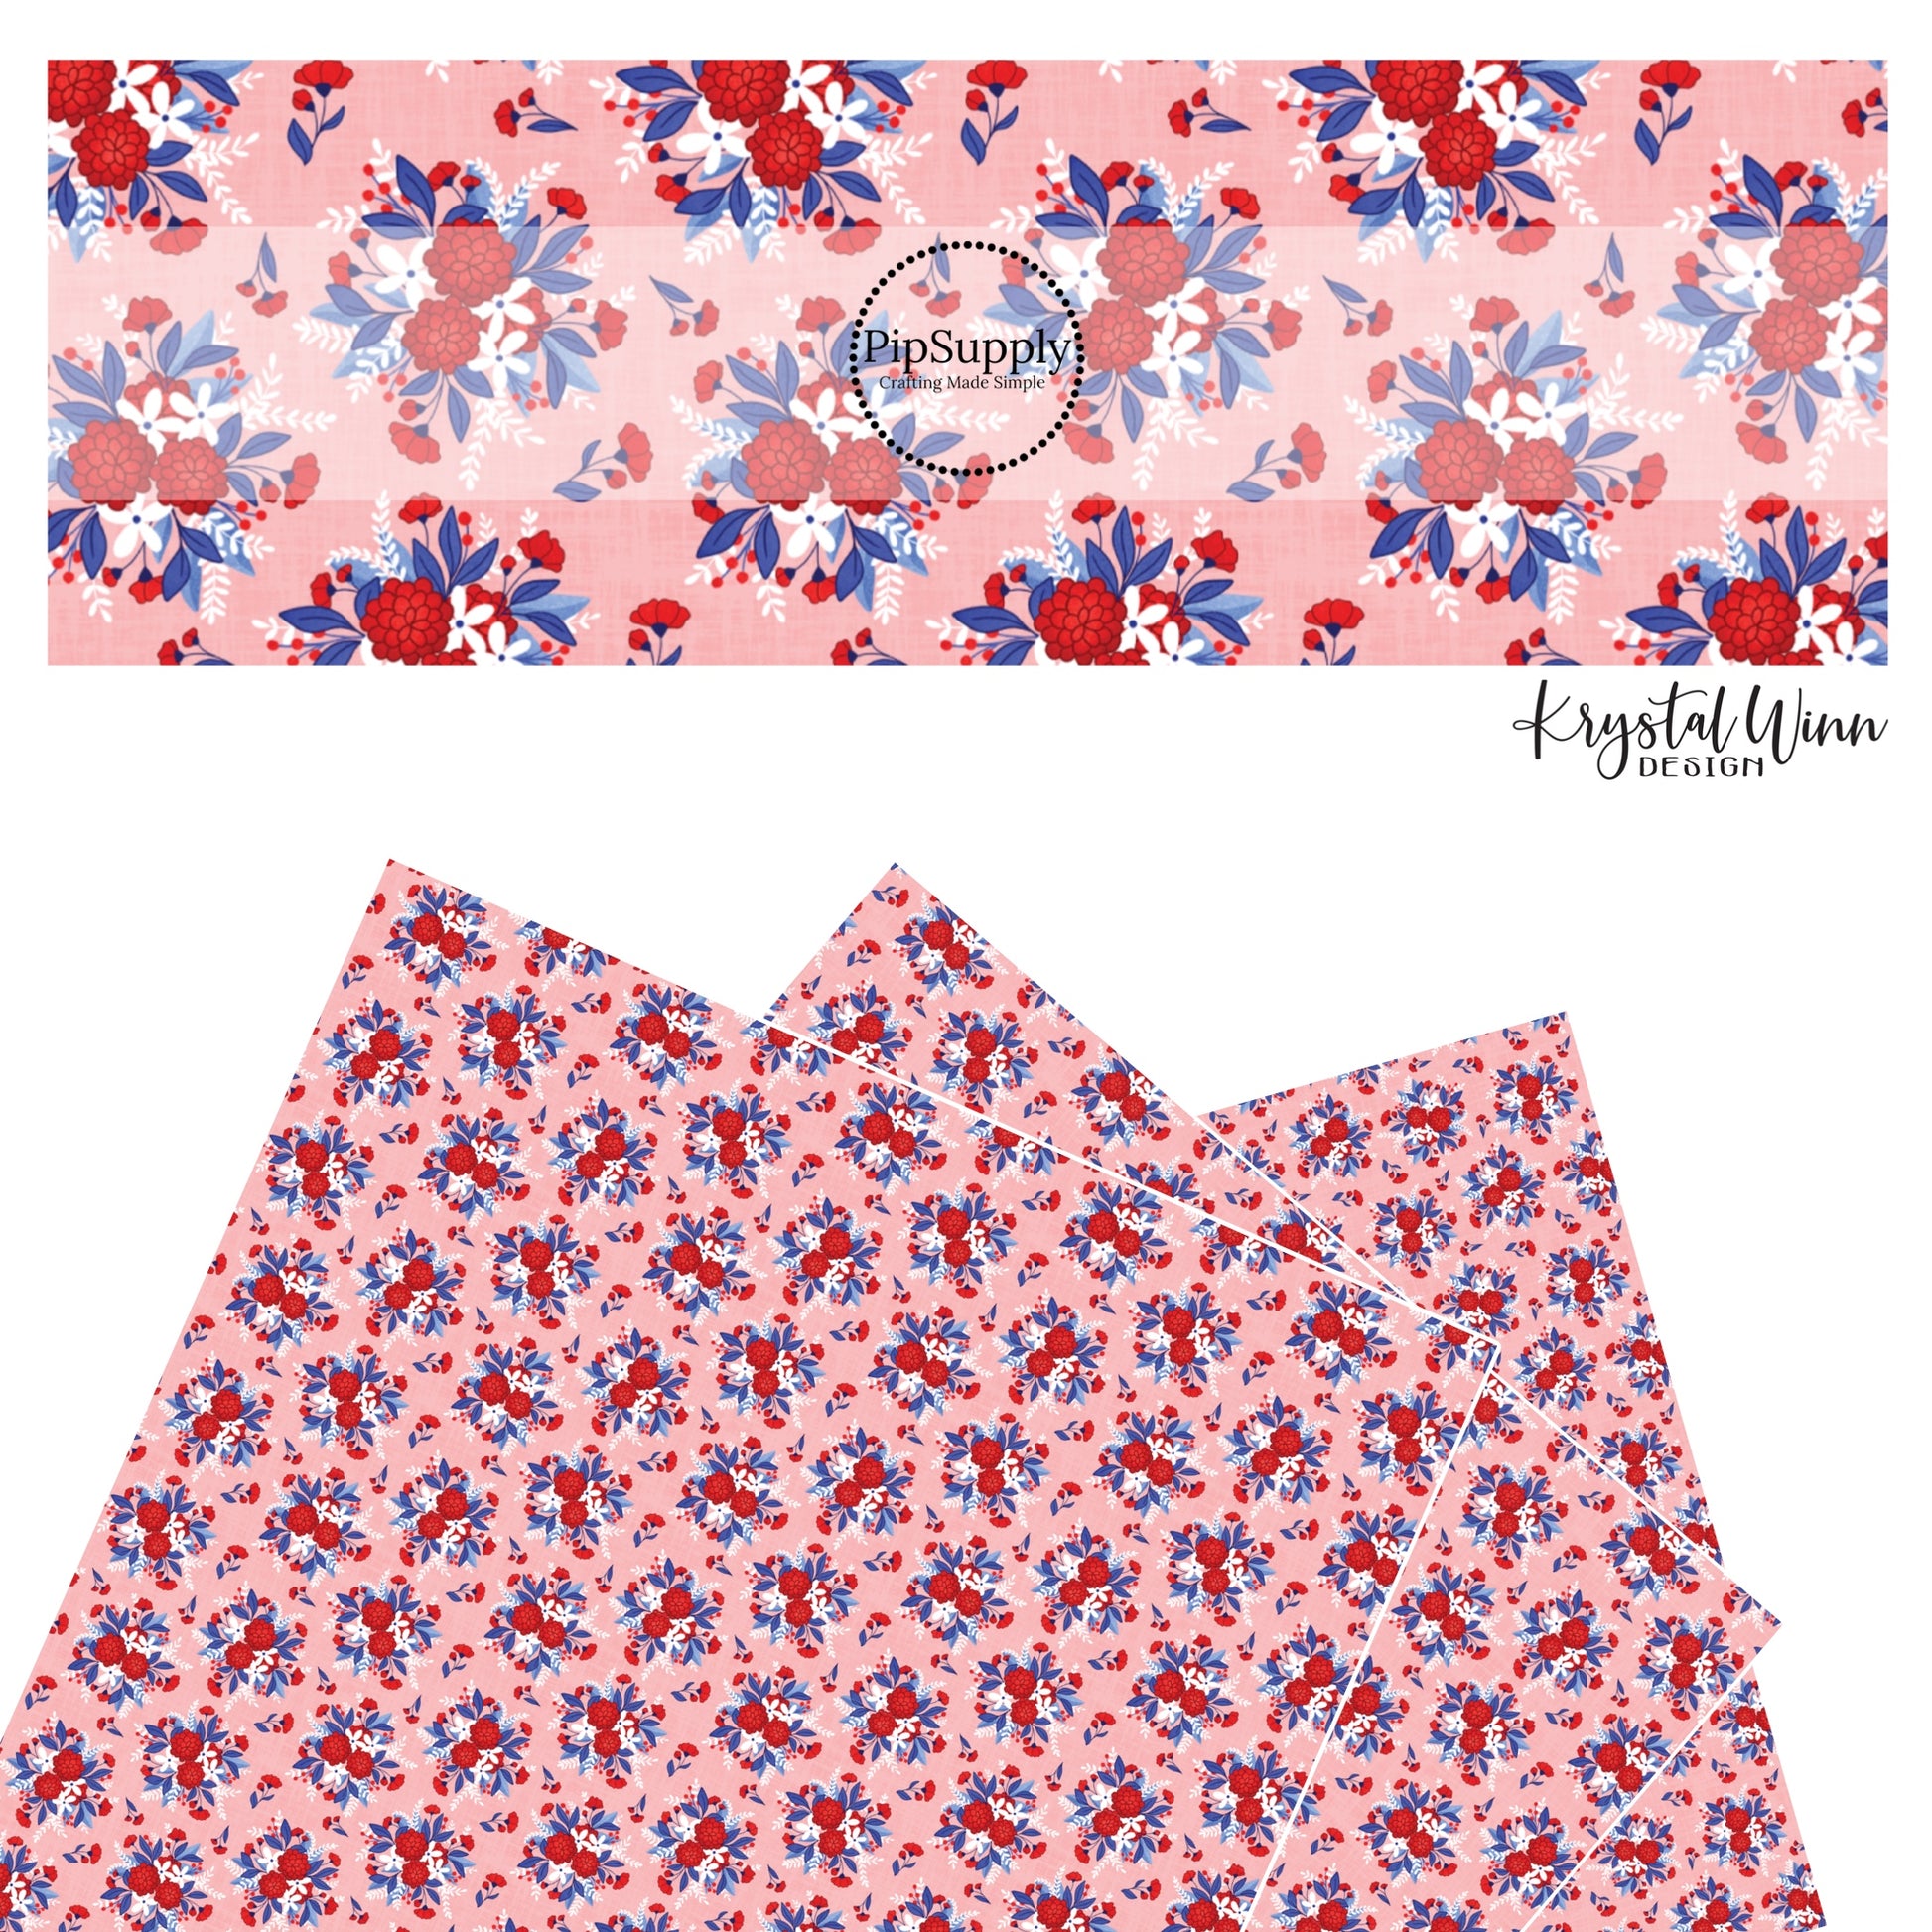 These red, white, and blue floral bouquets on light pink and peach faux leather sheets contain the following design elements: flowers in the colors of royal blue, red, and white.